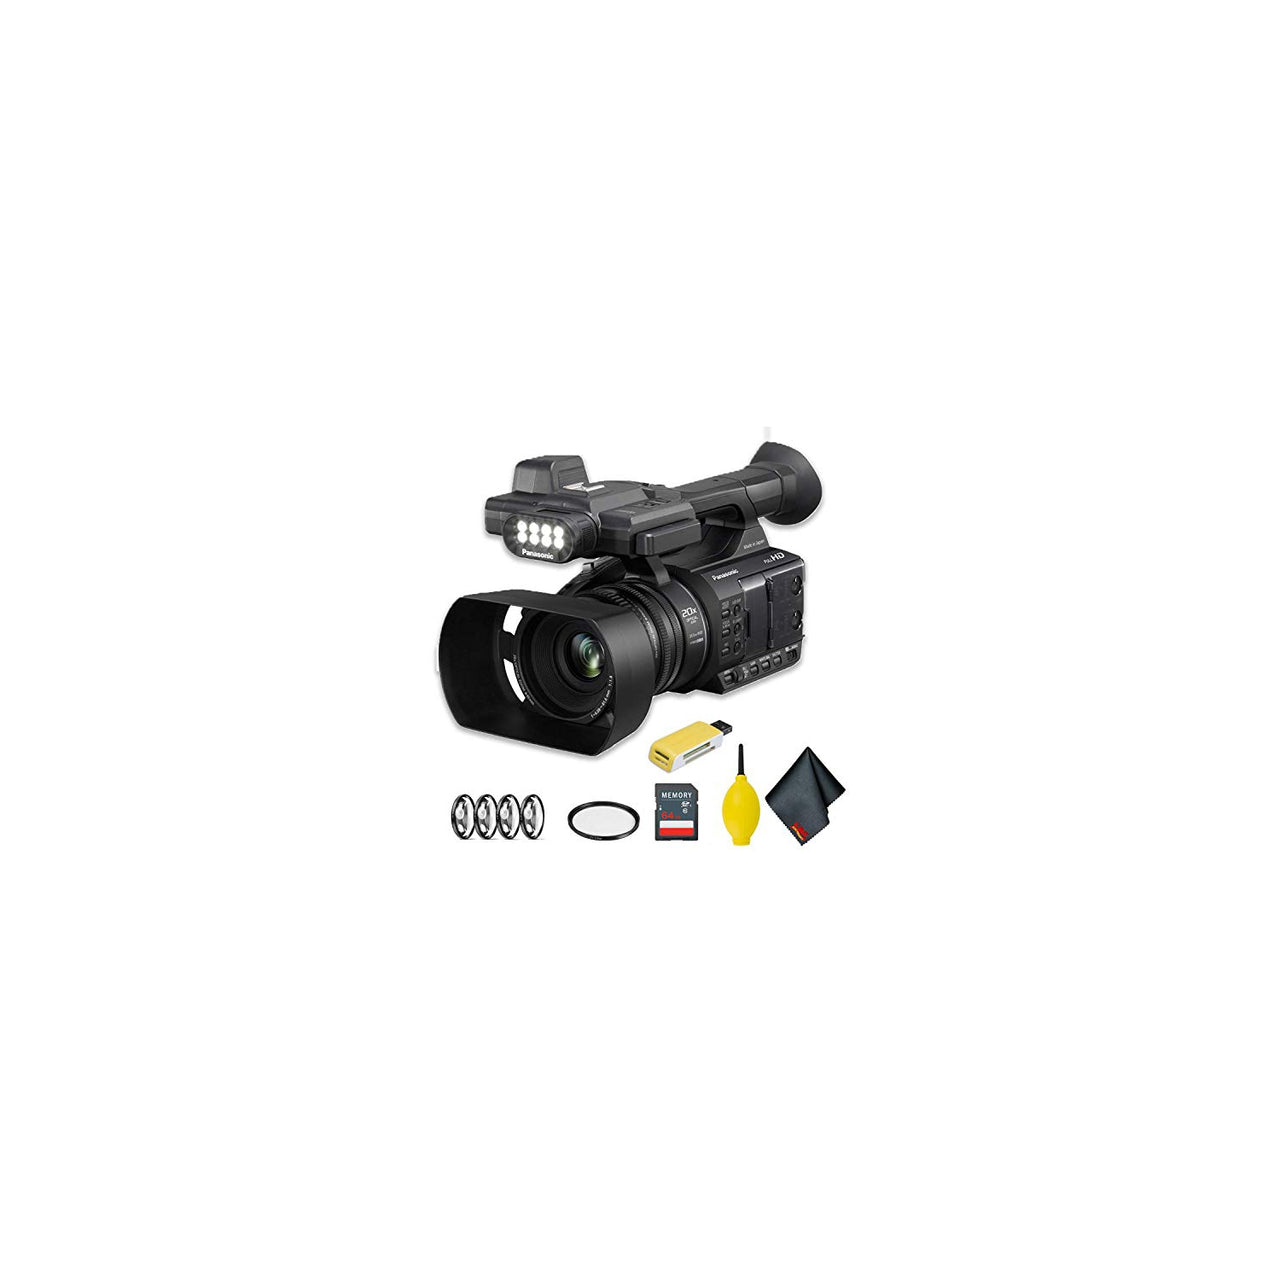 Panasonic AG-AC30 Full HD Camcorder with Touch Panel LCD Viewscreen and Built-in LED Light Standard Accessory Bundle w/U